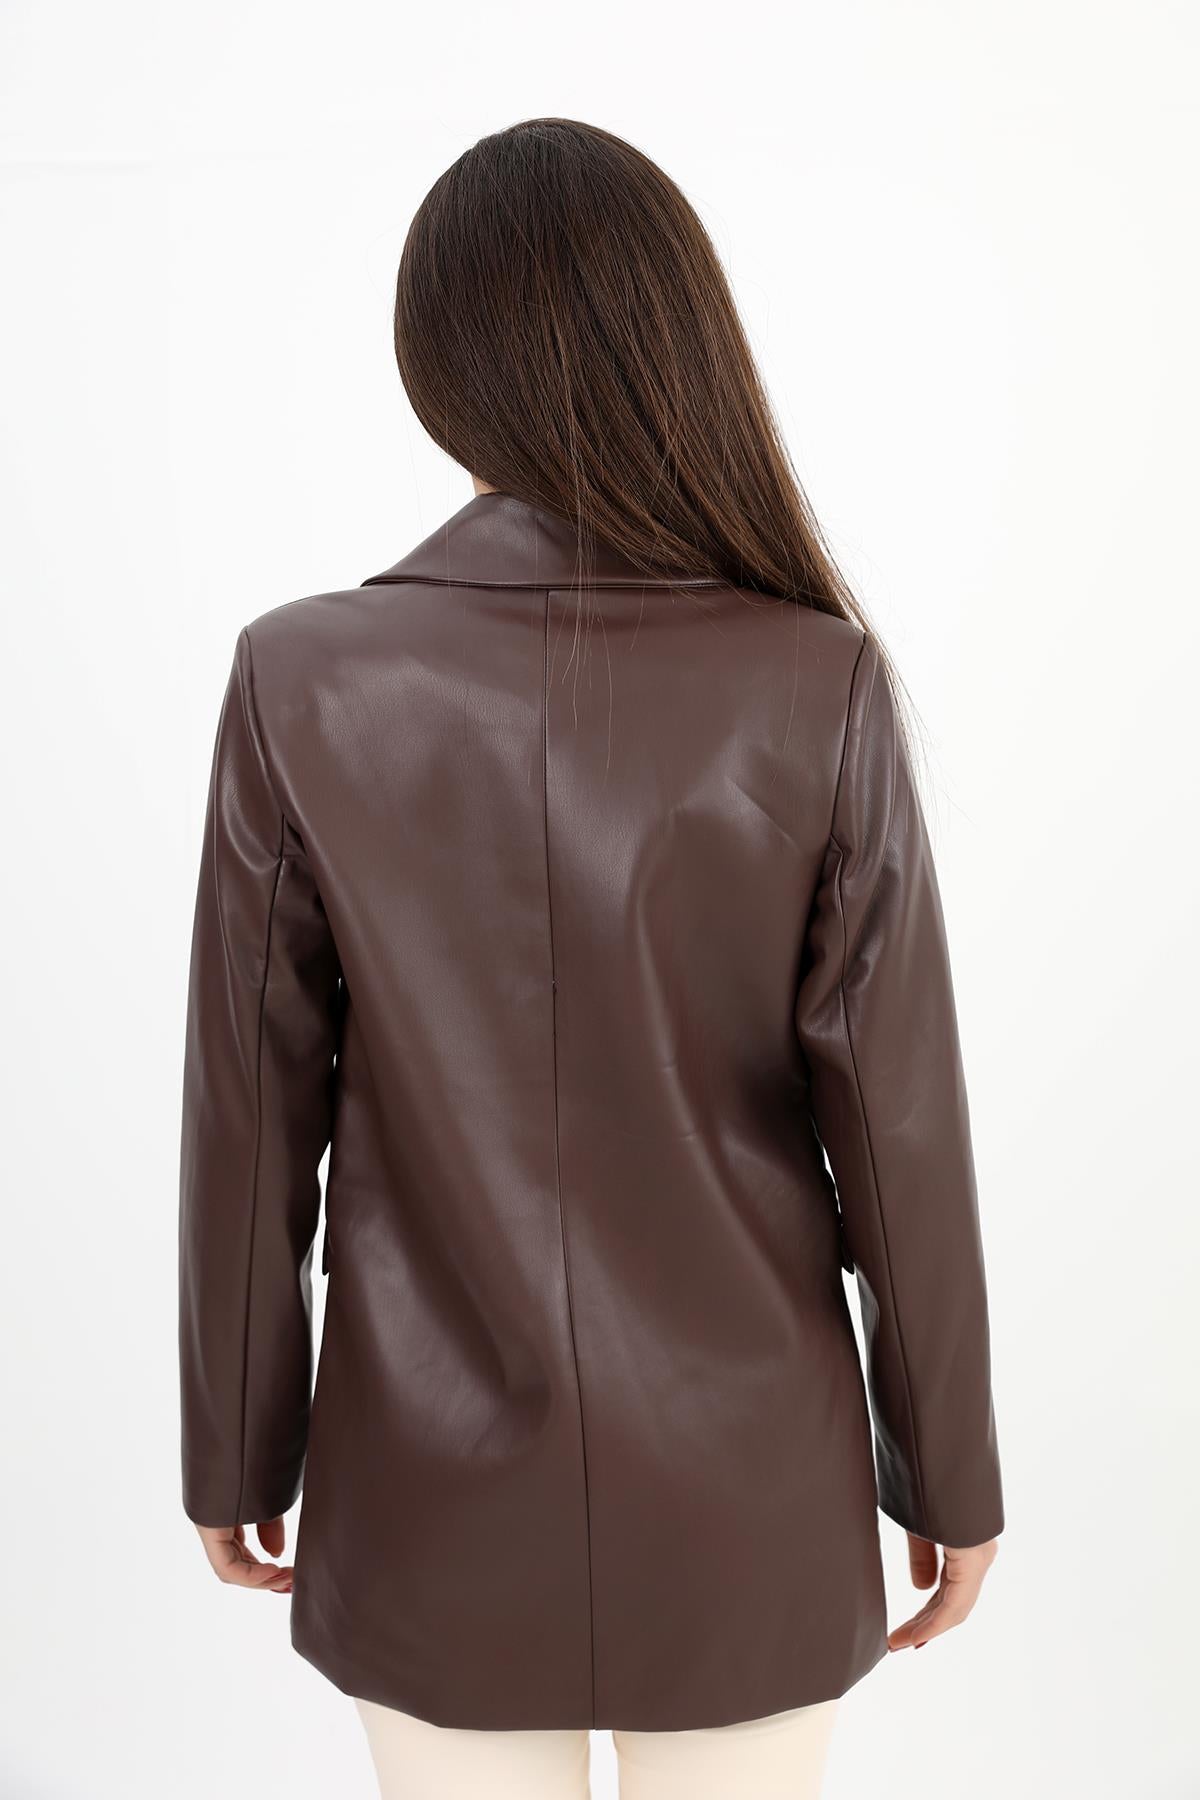 Women's Pocket Flap Leather Blazer Jacket with Padded Shoulders - Brown - STREETMODE ™